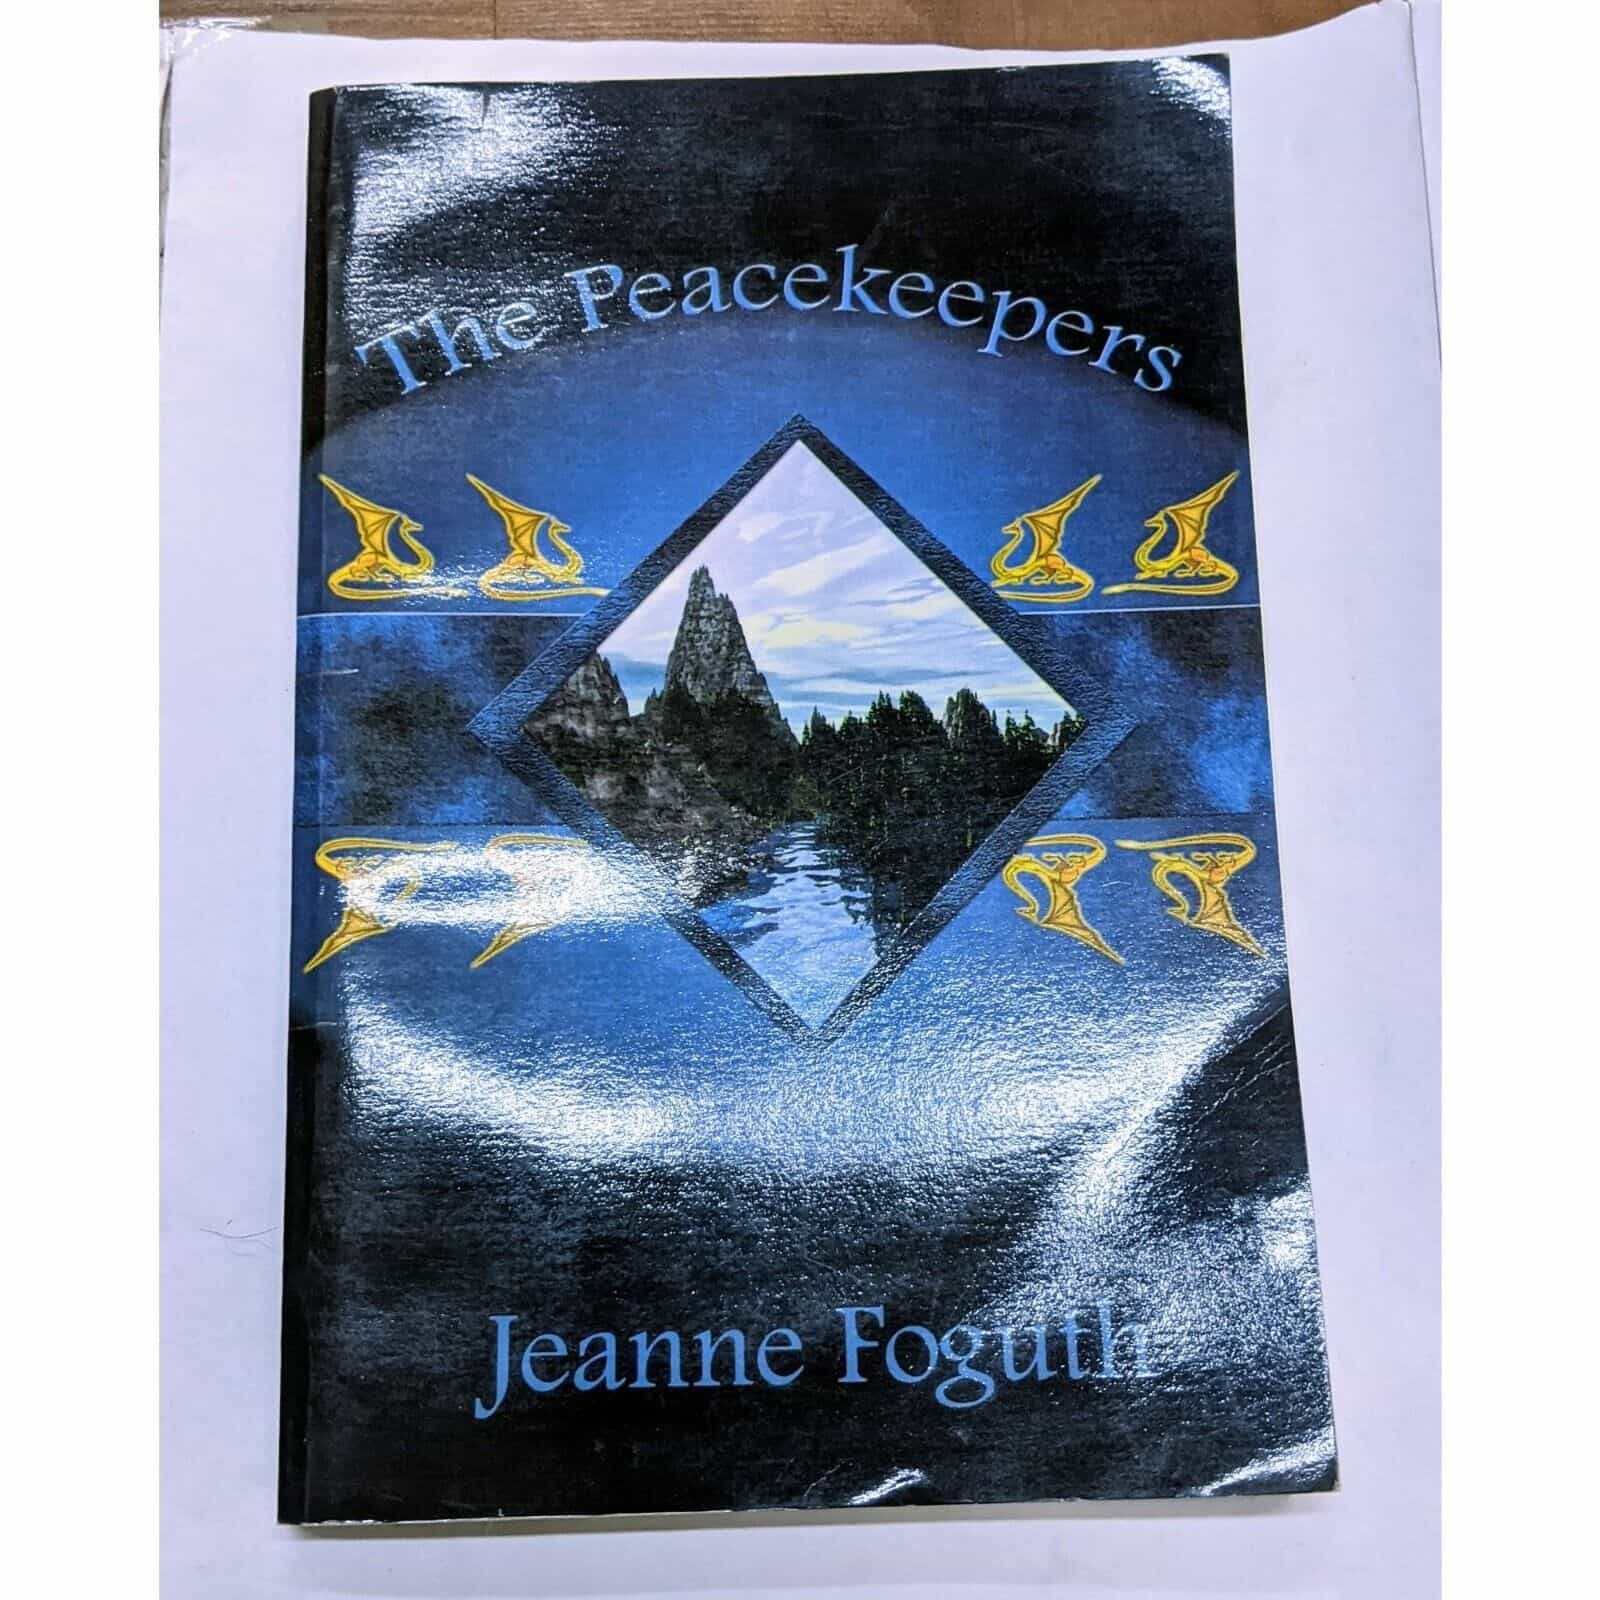 The Peacekeepers by Jeanne Foguth Book